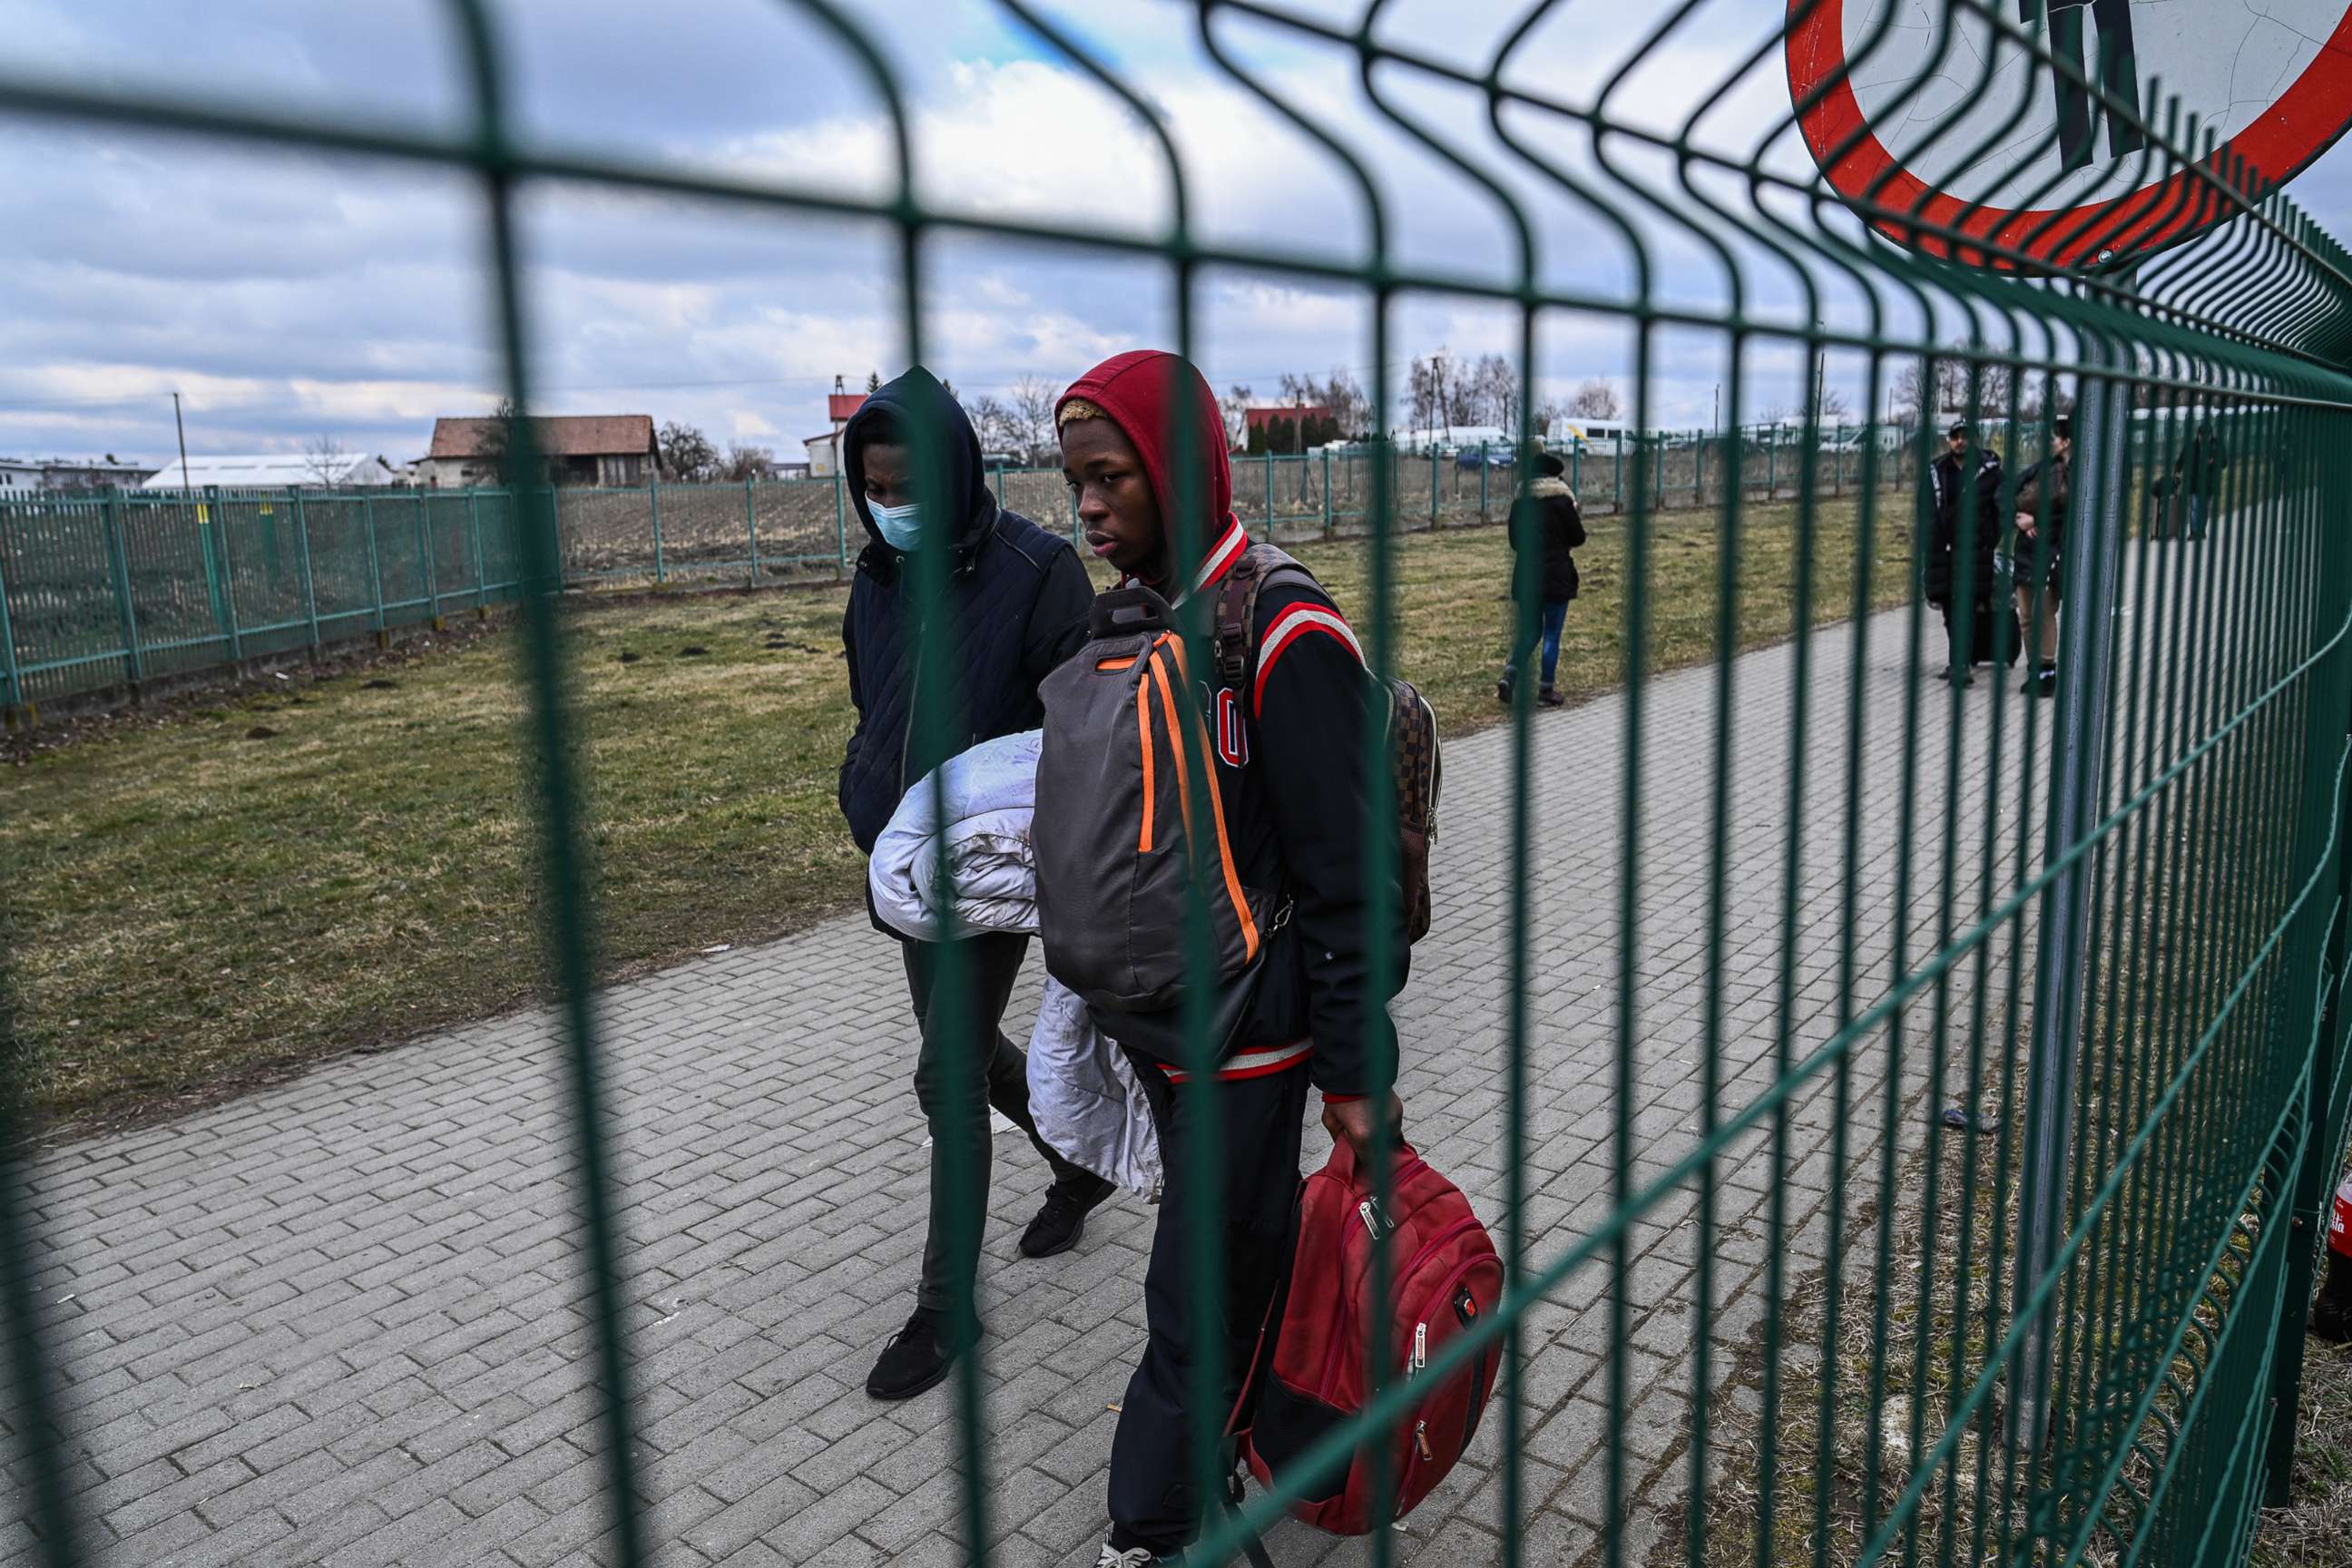 PHOTO: People from the Middle East and Africa carry bags as they arrive at the Polish Ukrainian border crossing on Feb. 28, 2022, in Medyka, Poland.